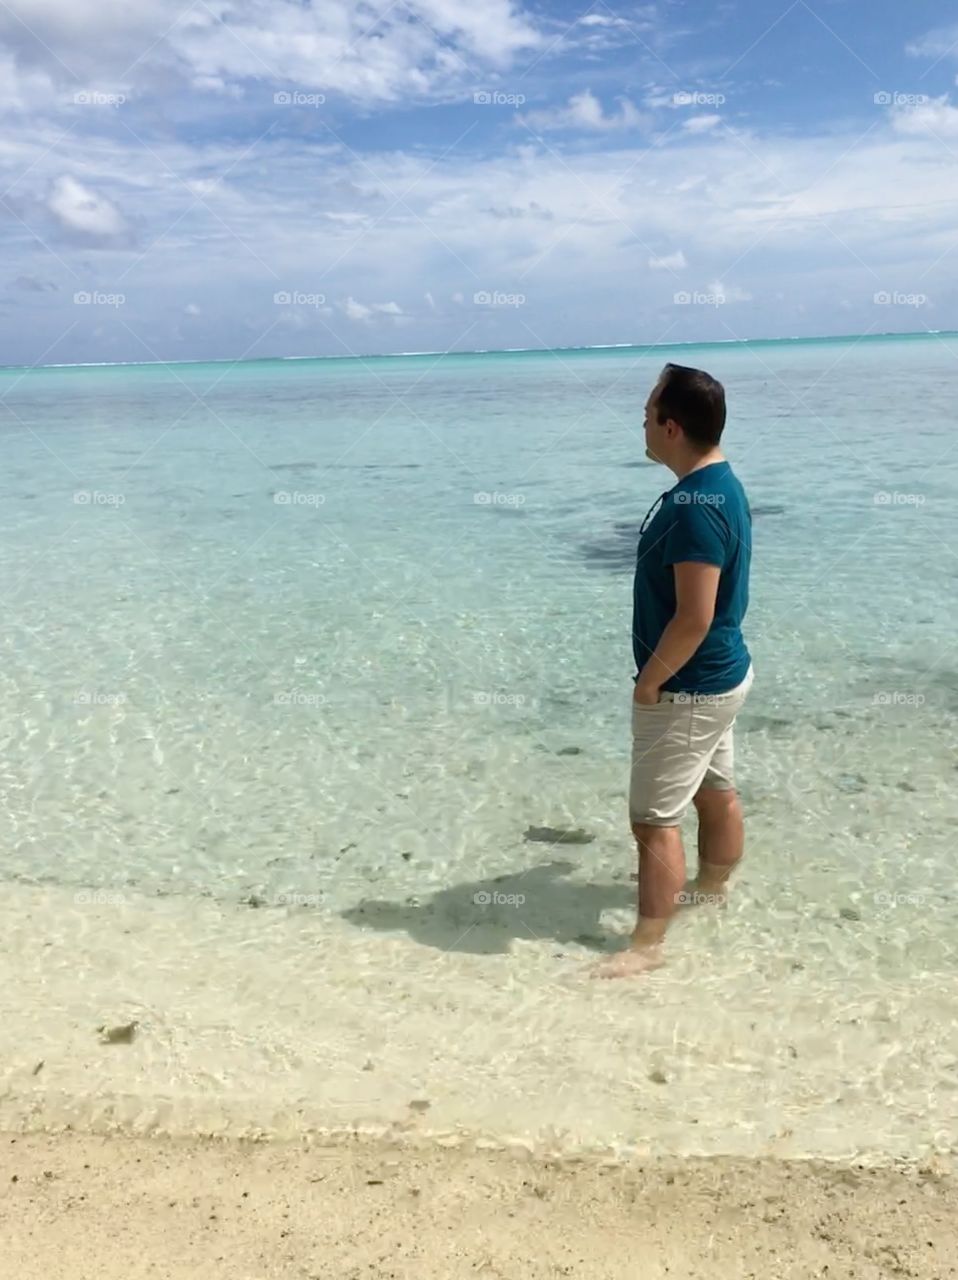 Man looking out at the beach in beautiful clear waters